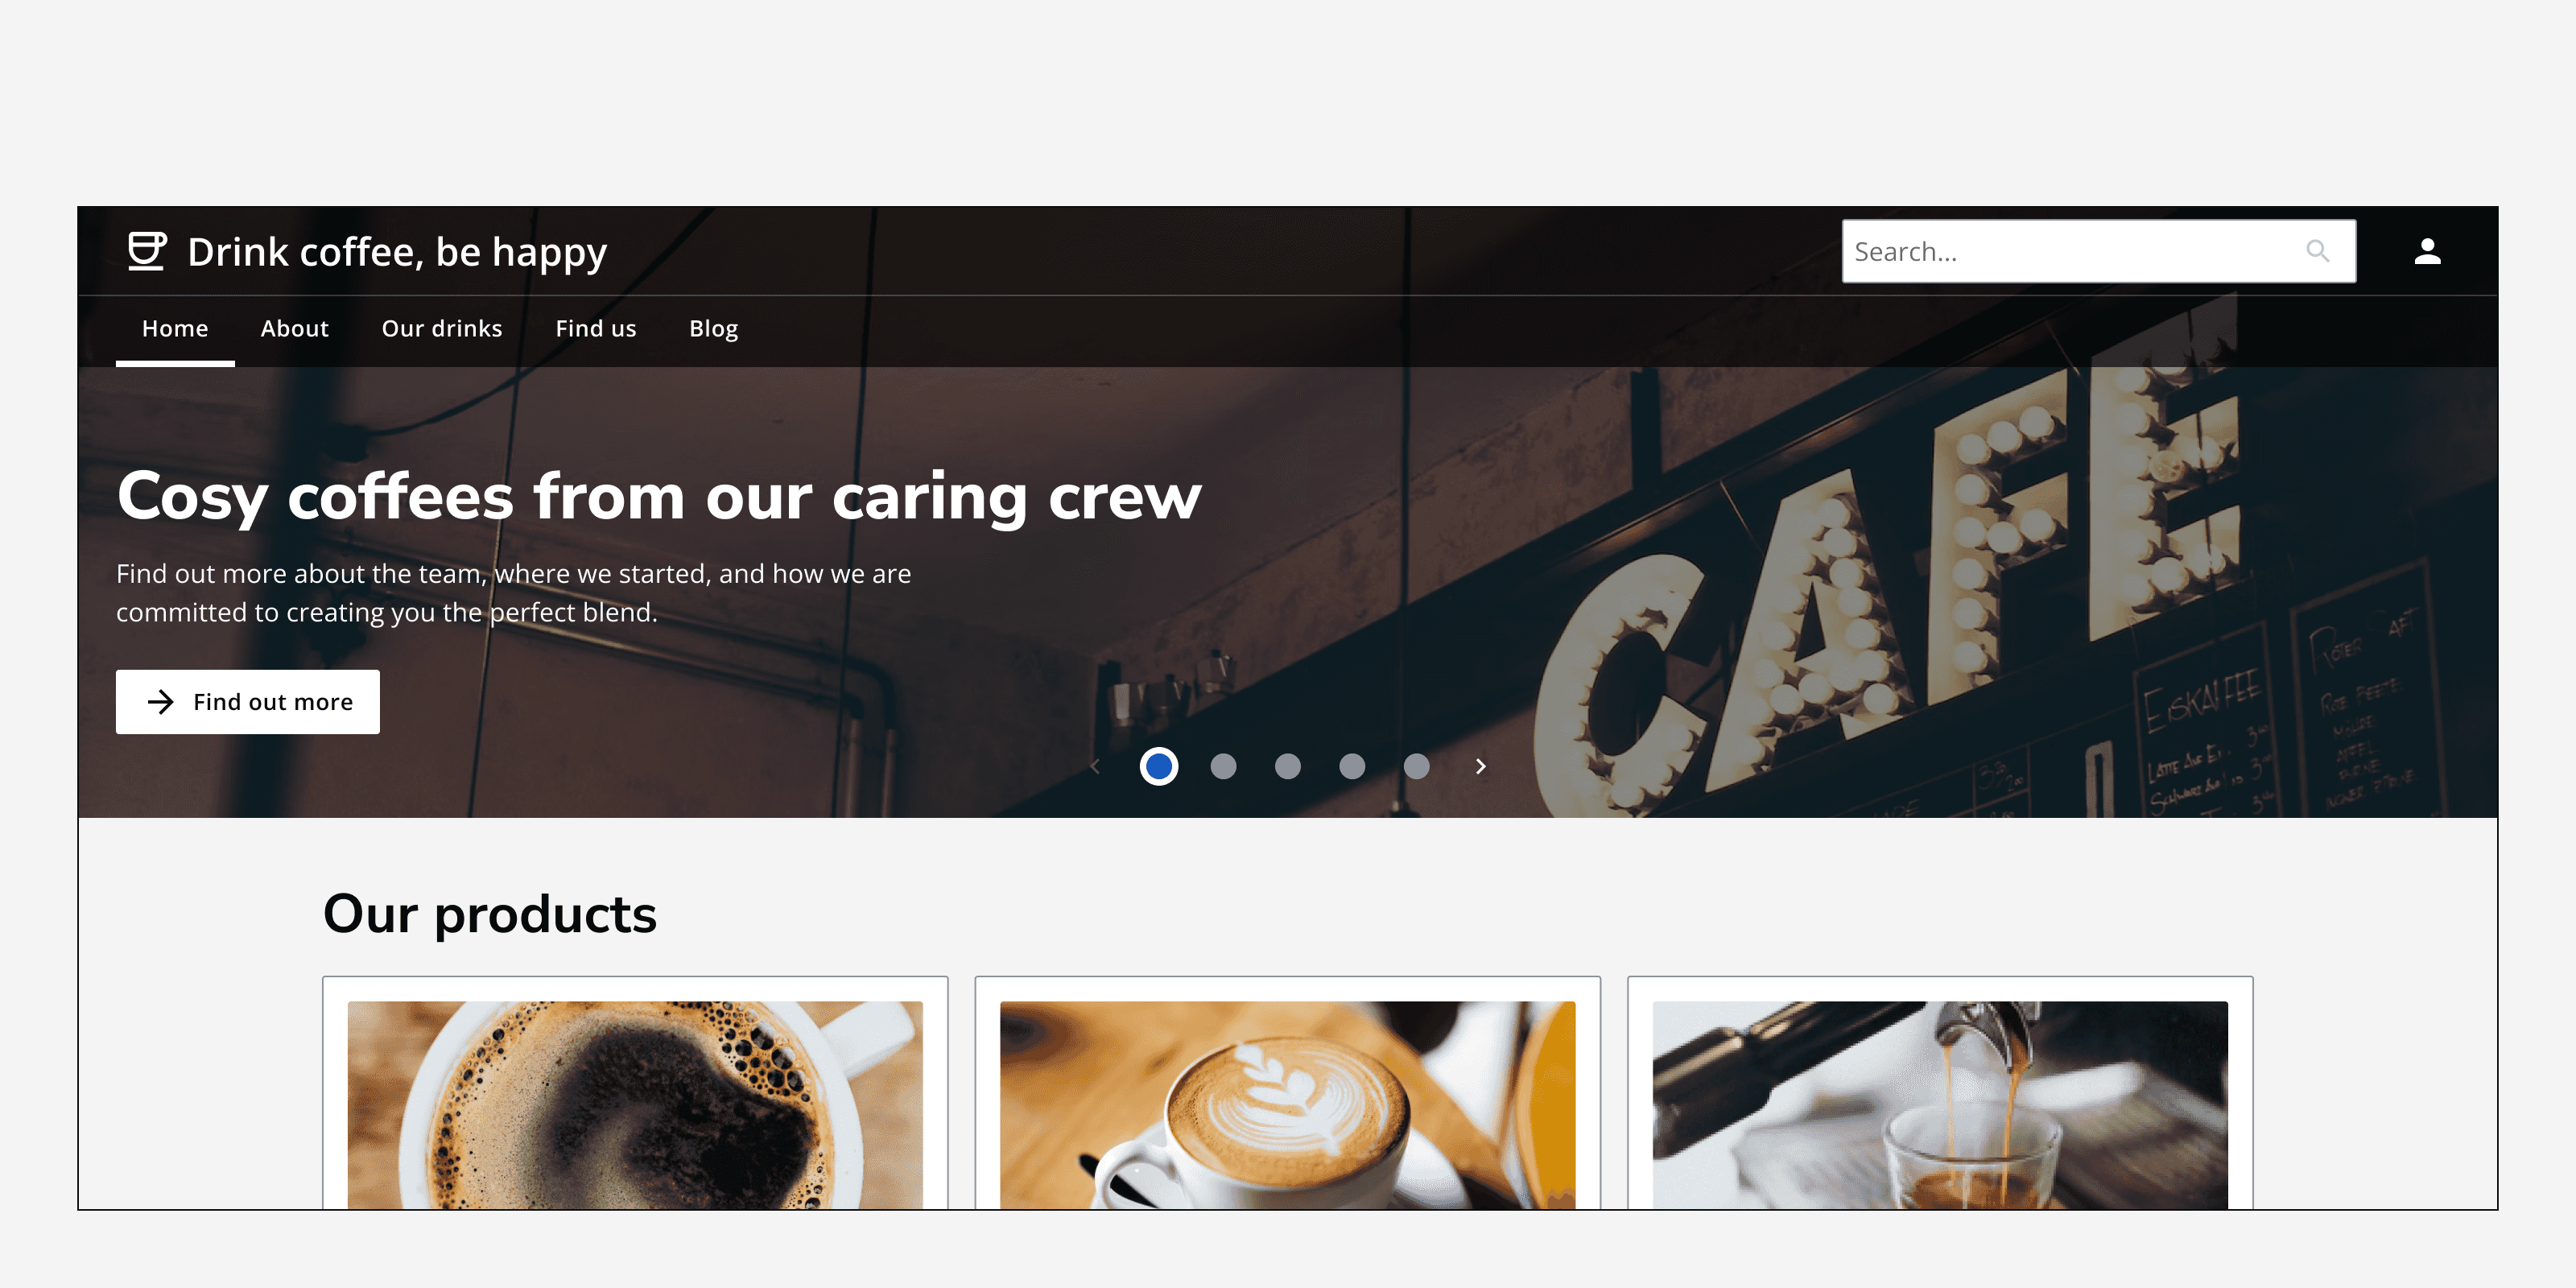 An example homepage for a coffee shop called ‘Drink coffee, be happy’. A hero banner sits at the top of the page with a carousel pagination control overlaid at its bottom.